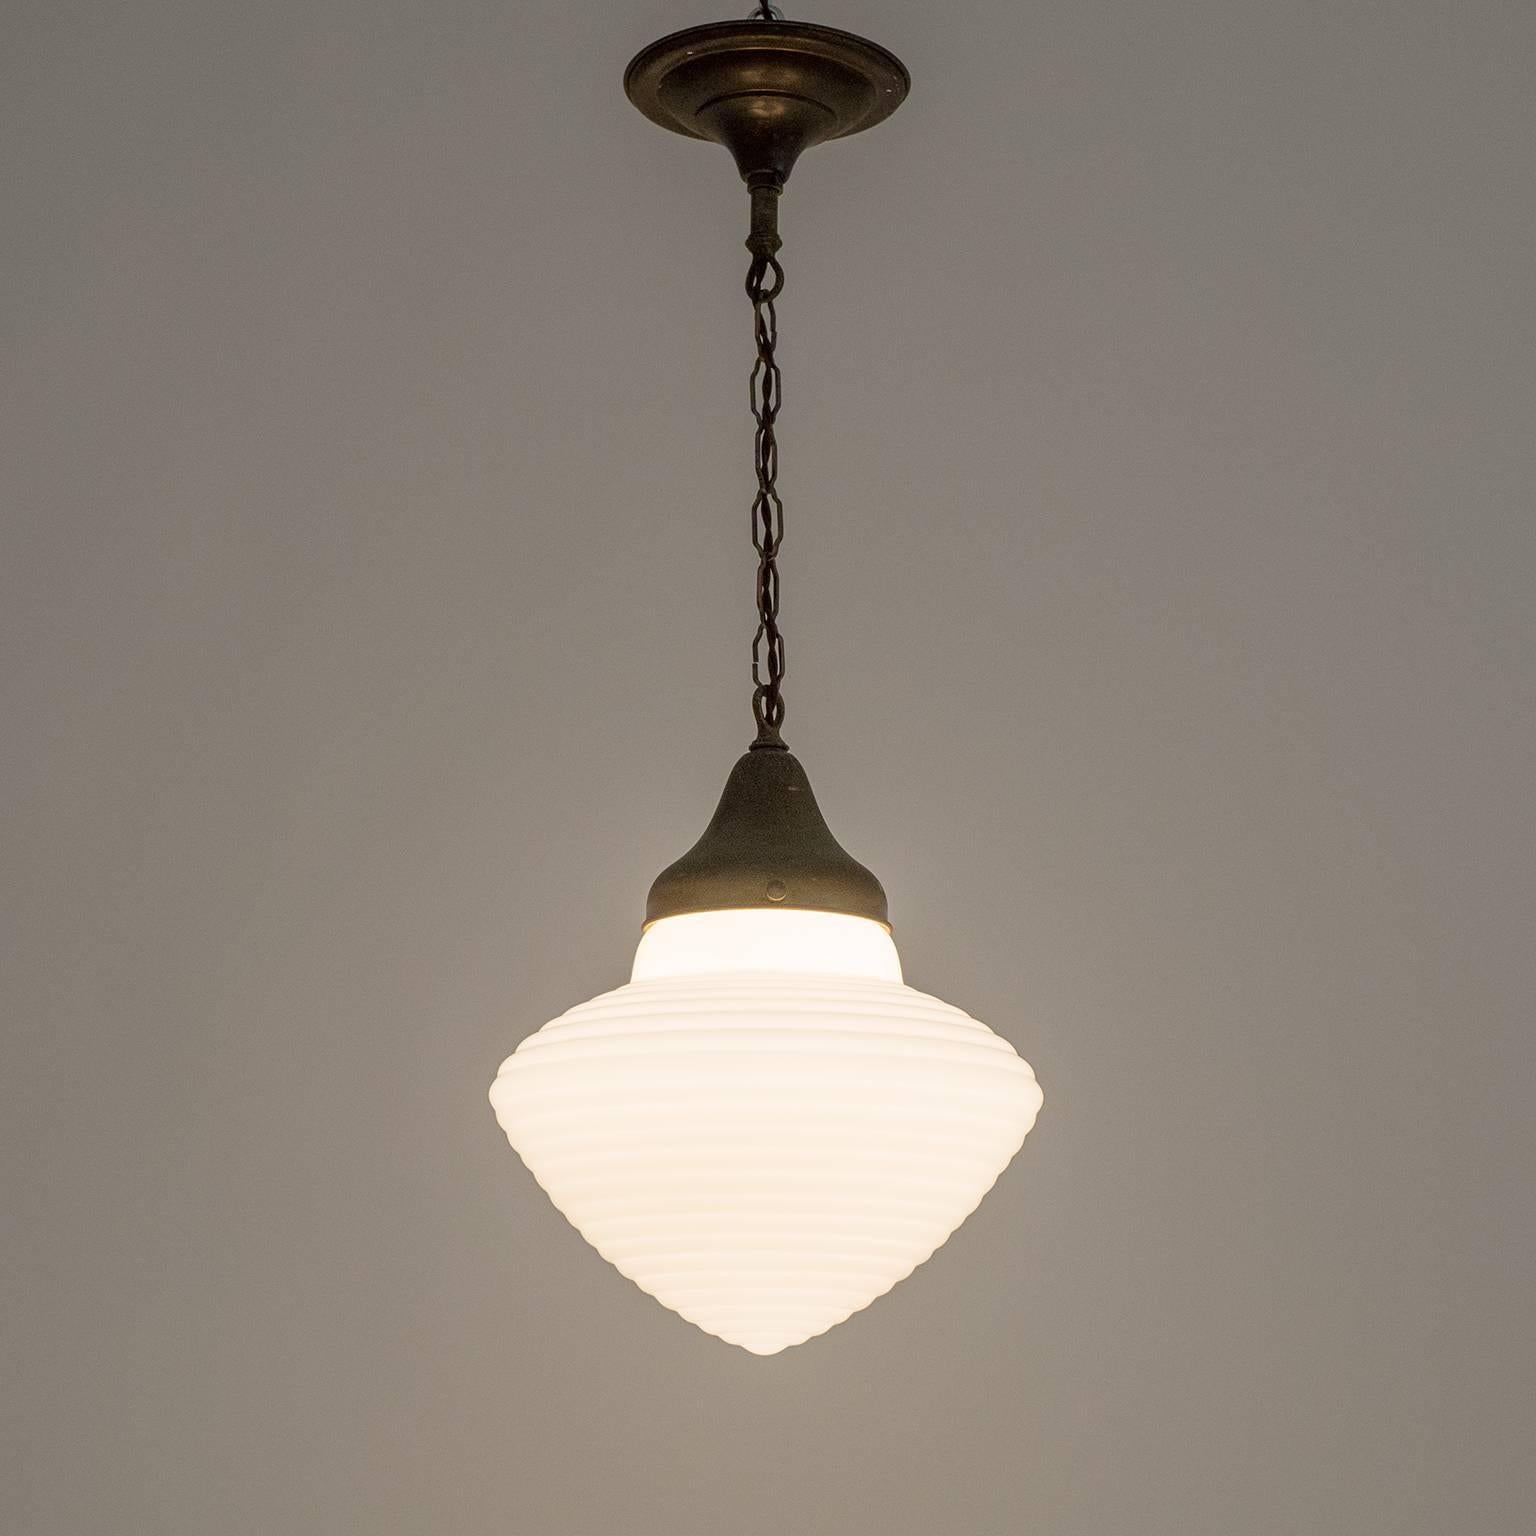 Rare Italian Art Deco industrial milk glass pendant from the 1920s. The very unusual ribbed glass body is suspended by beautifully aged brass and copper. One original brass and ceramic E27 socket with new wiring. Measure: Drop height is circa